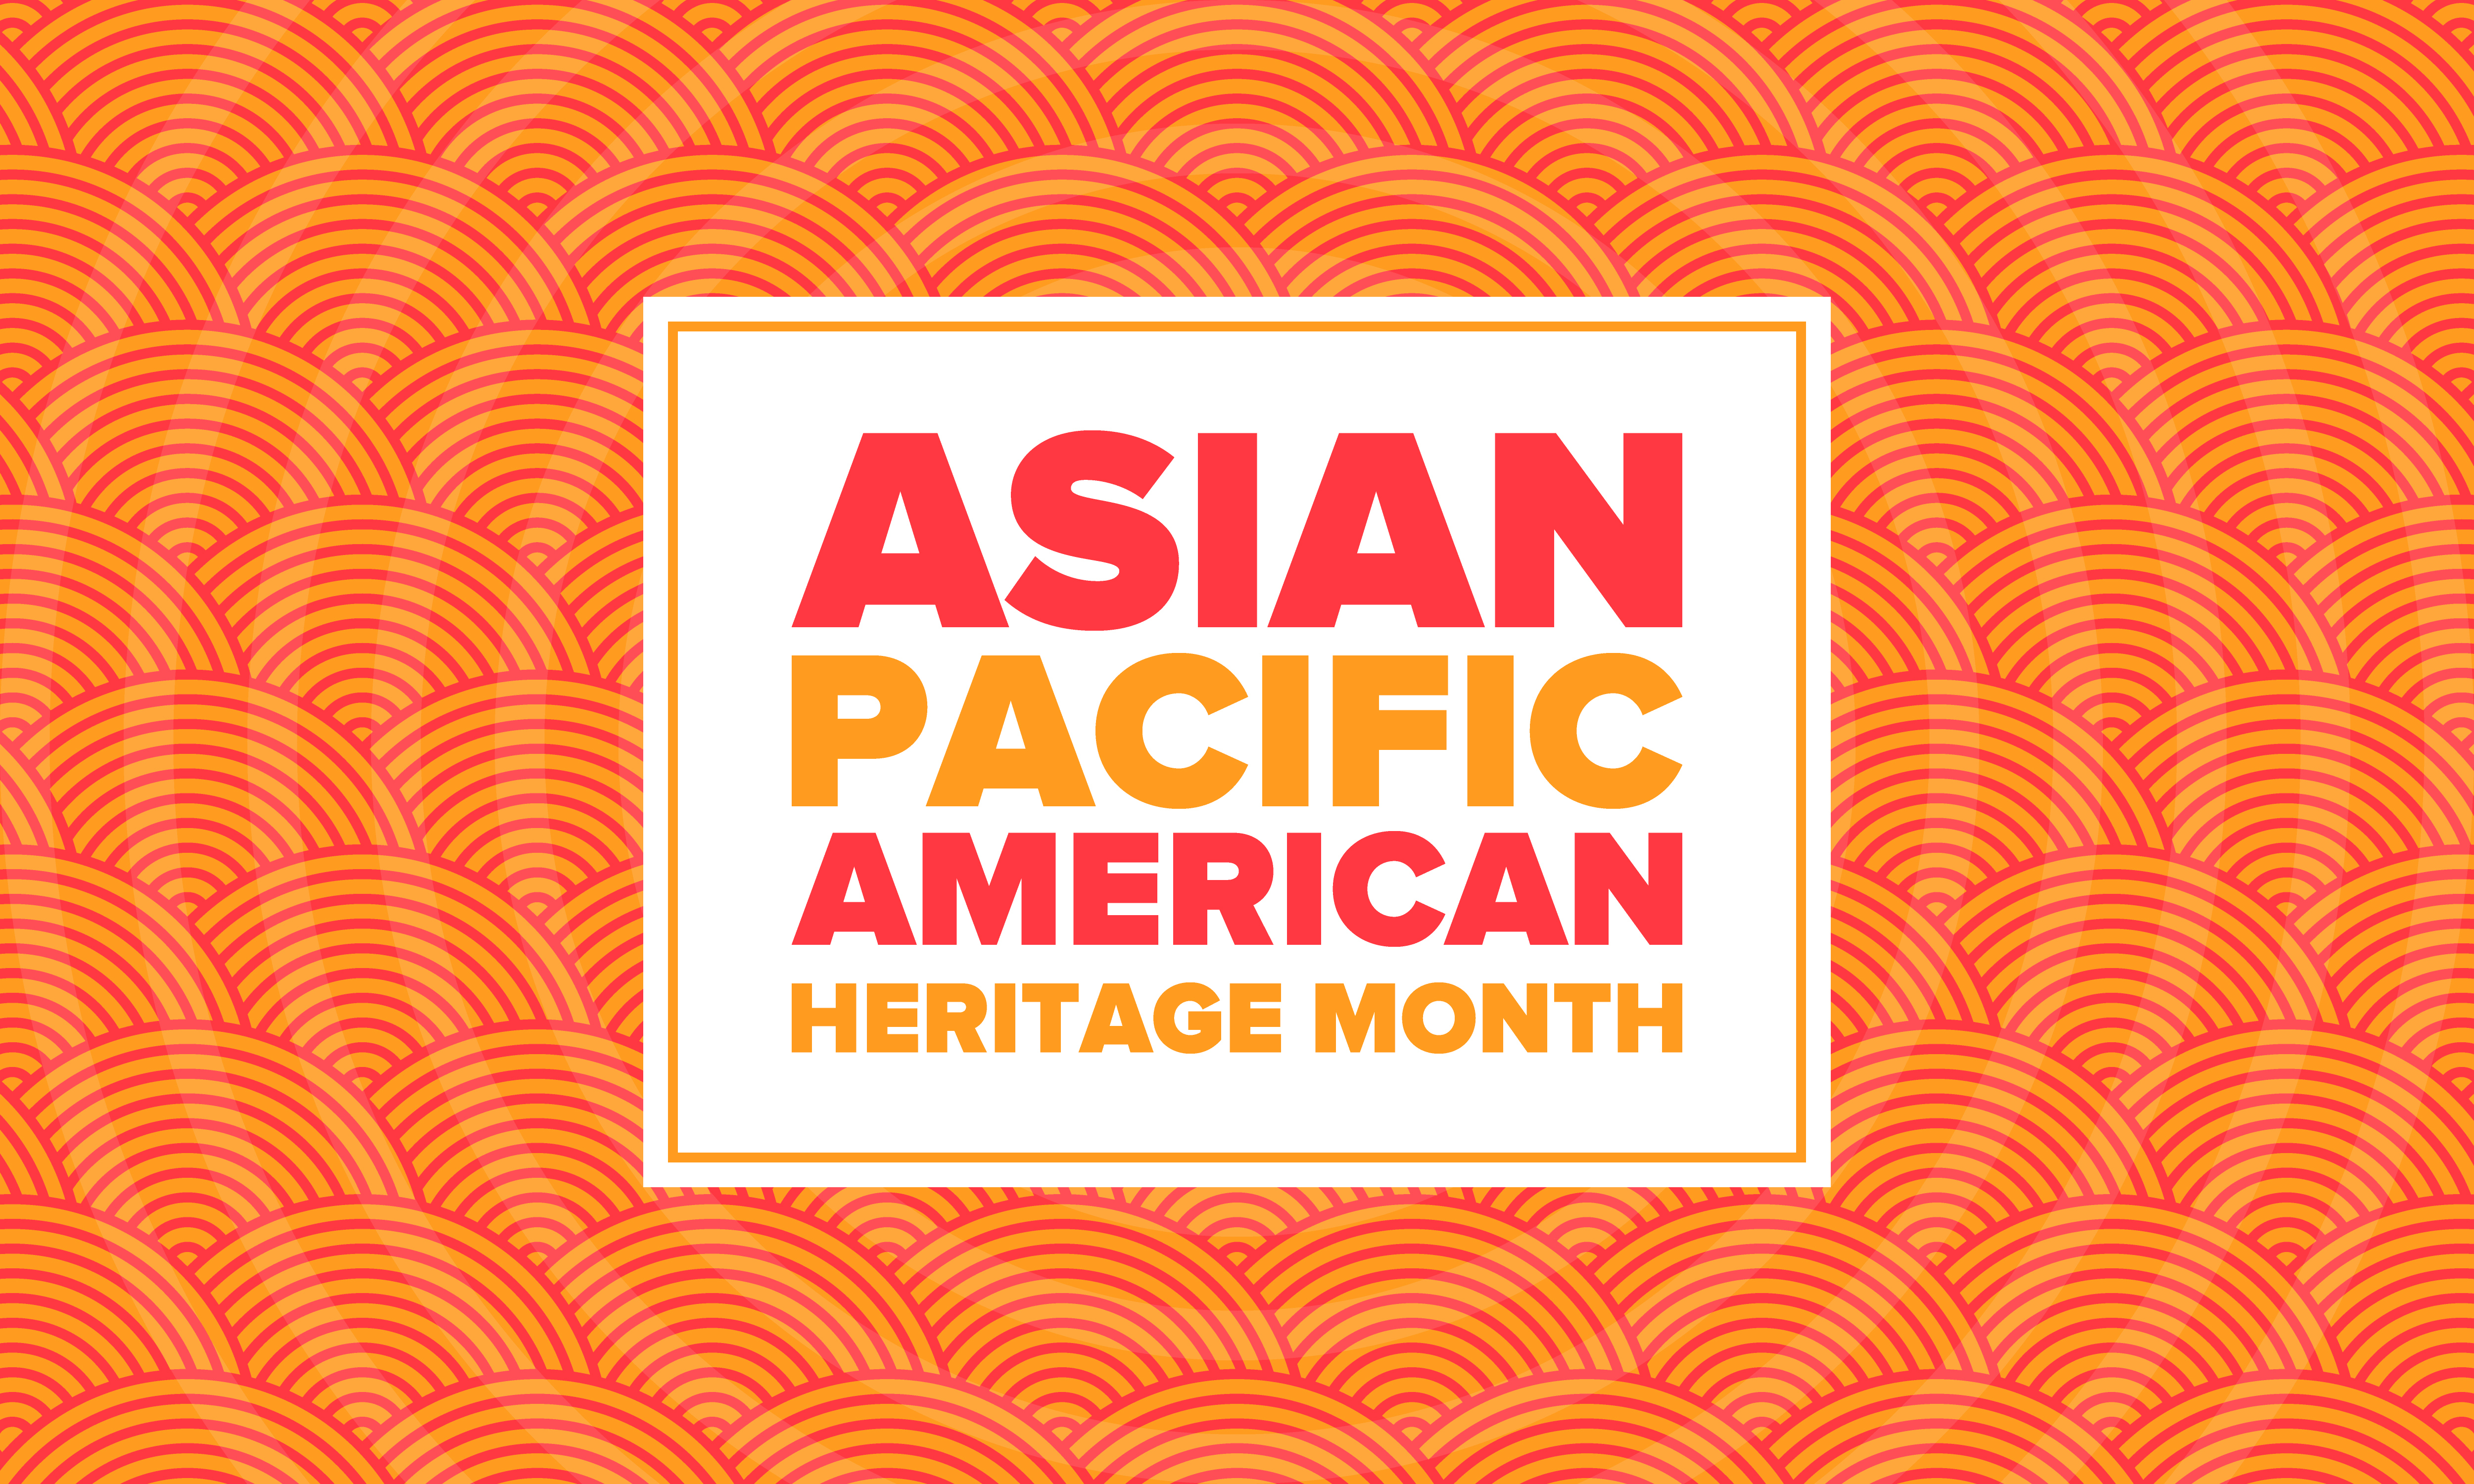 Orange patterned image. Text overlay reads: Asian Pacific American Heritage Month